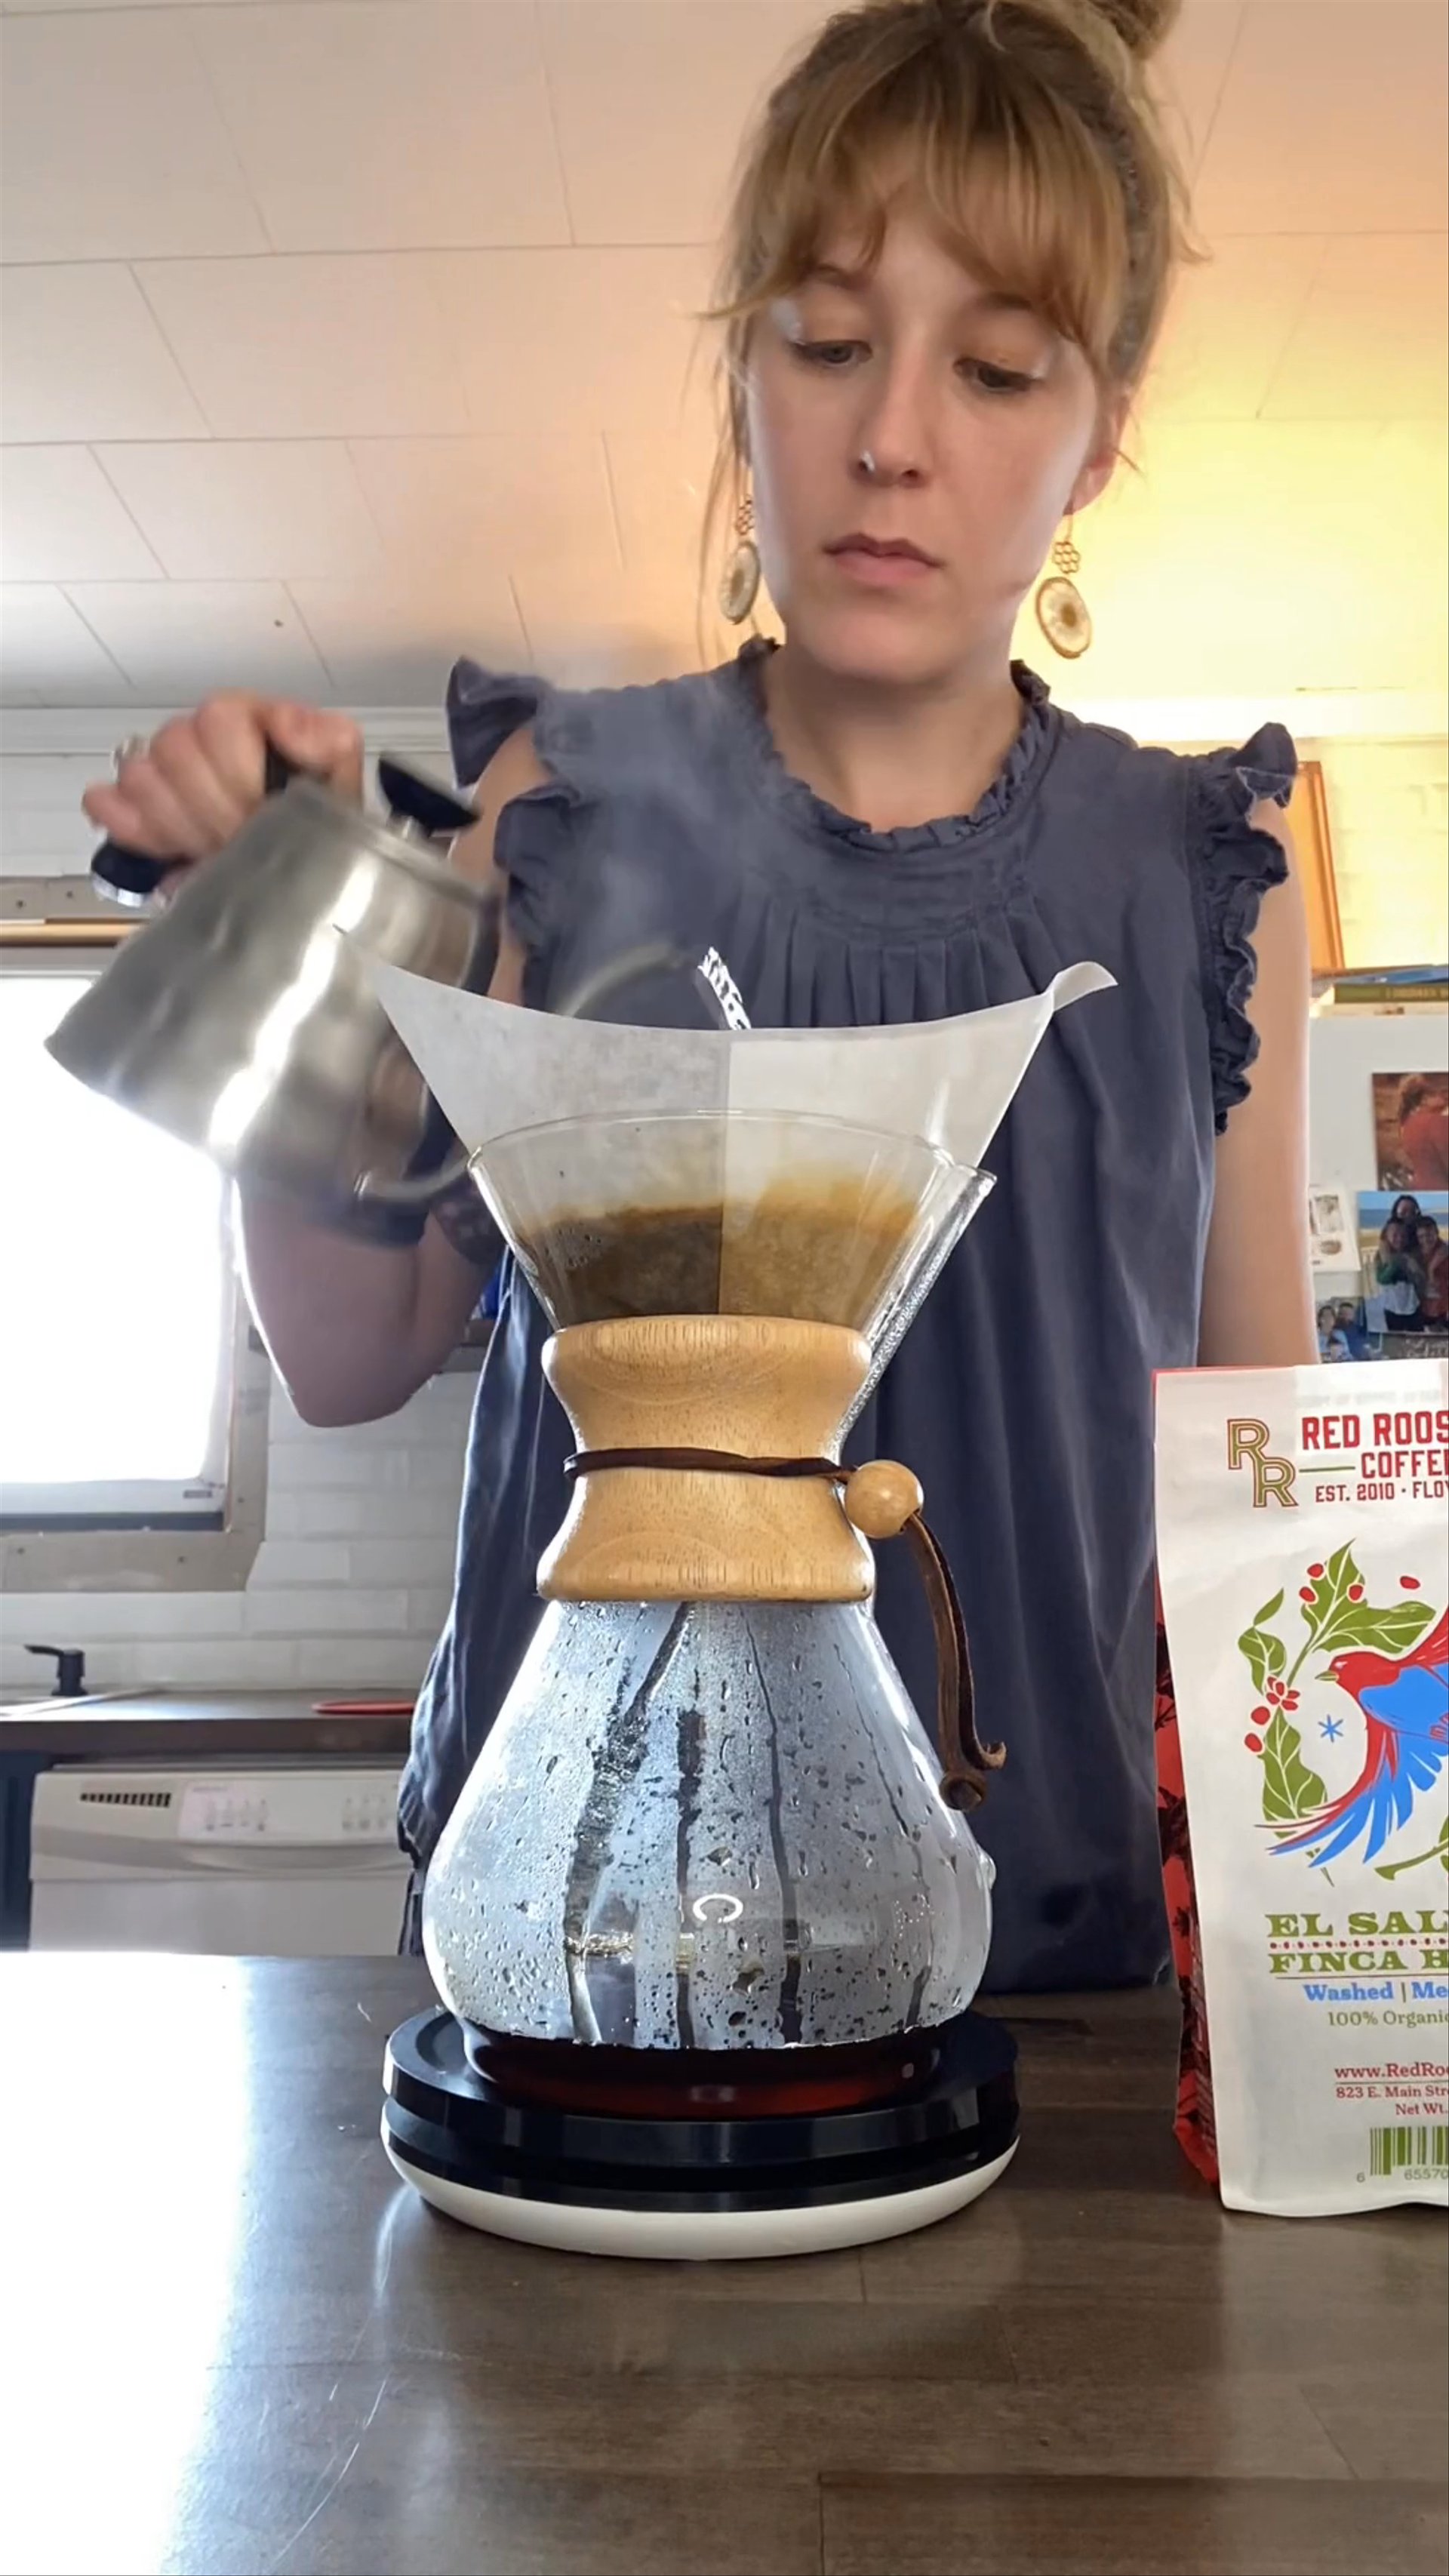 Chemex® Pour-Over Glass Coffee Maker with Wood Collar